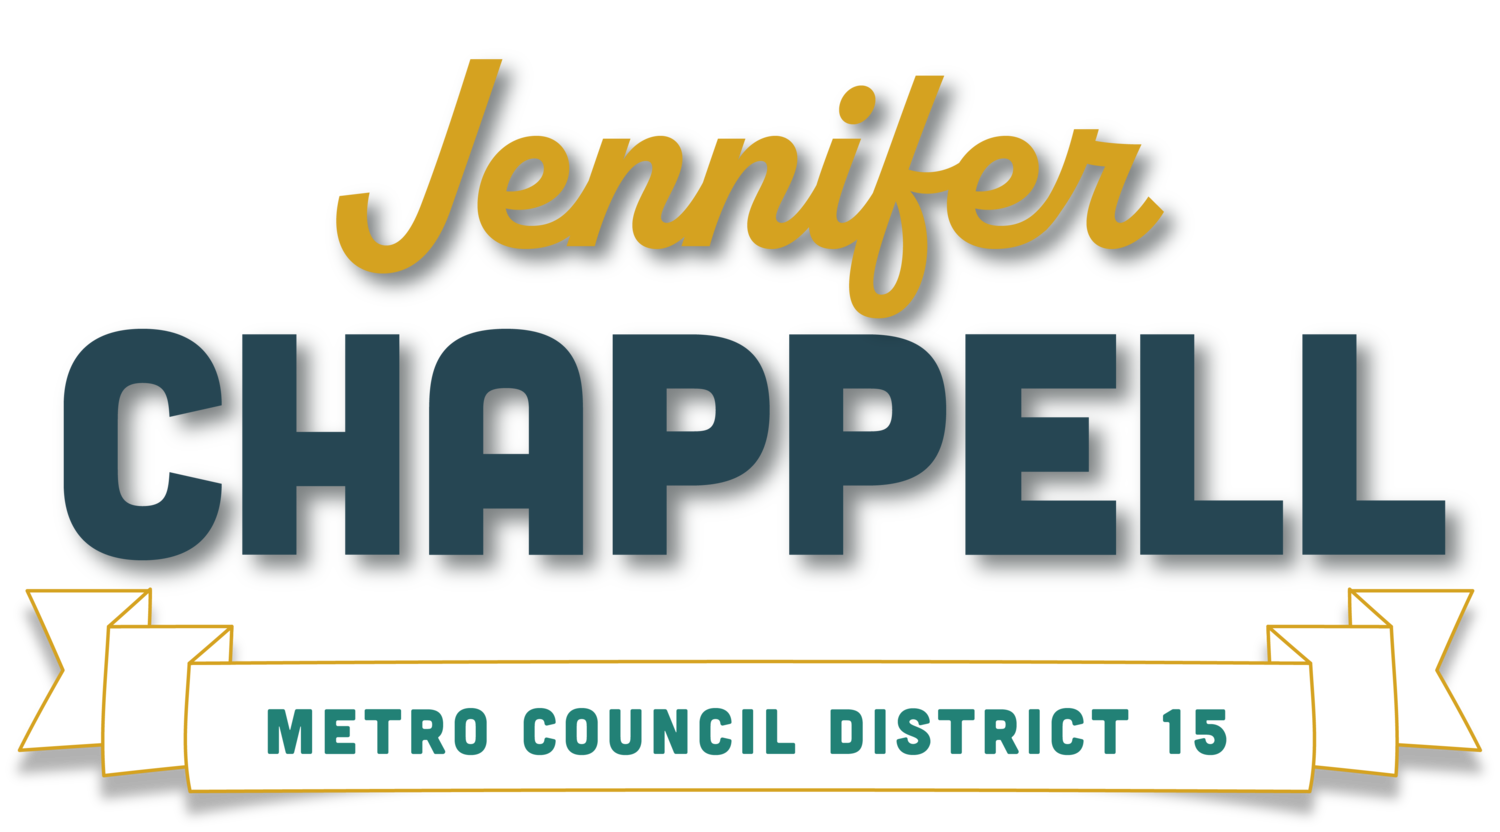 Jennifer Chappell for Metro Council